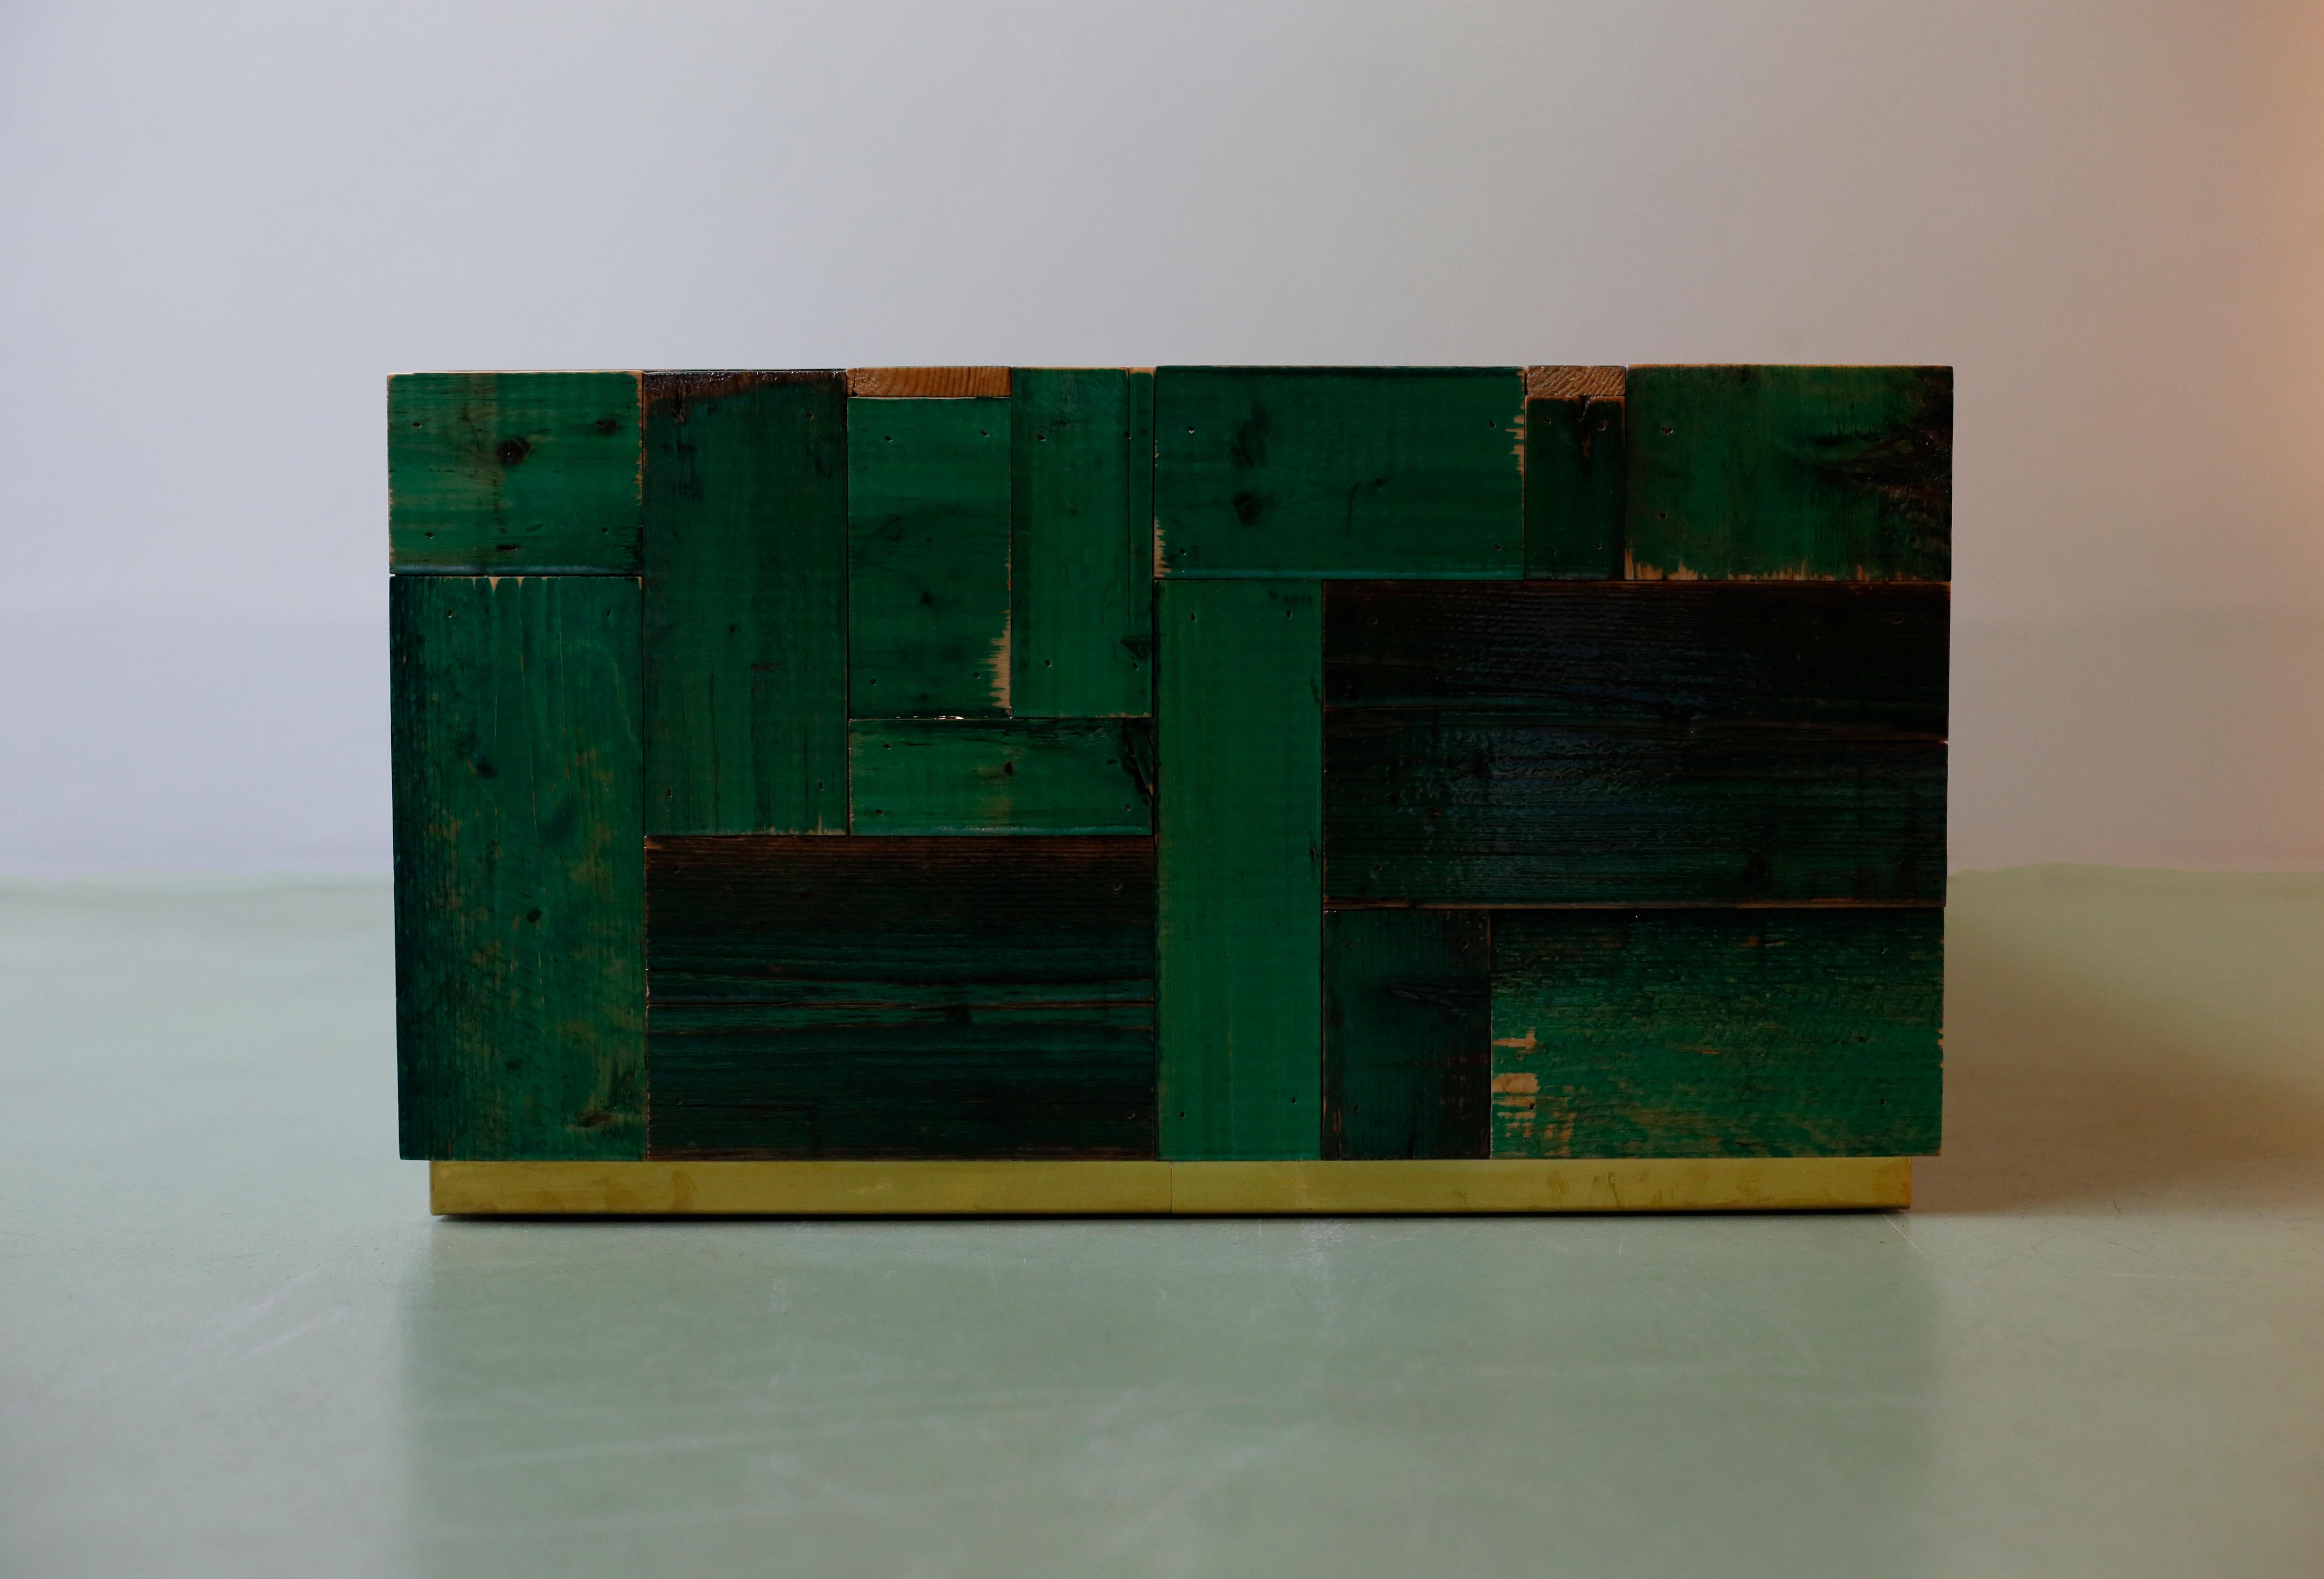 Lacquered Green Waste Coffee Cube, Piet Hein Eek